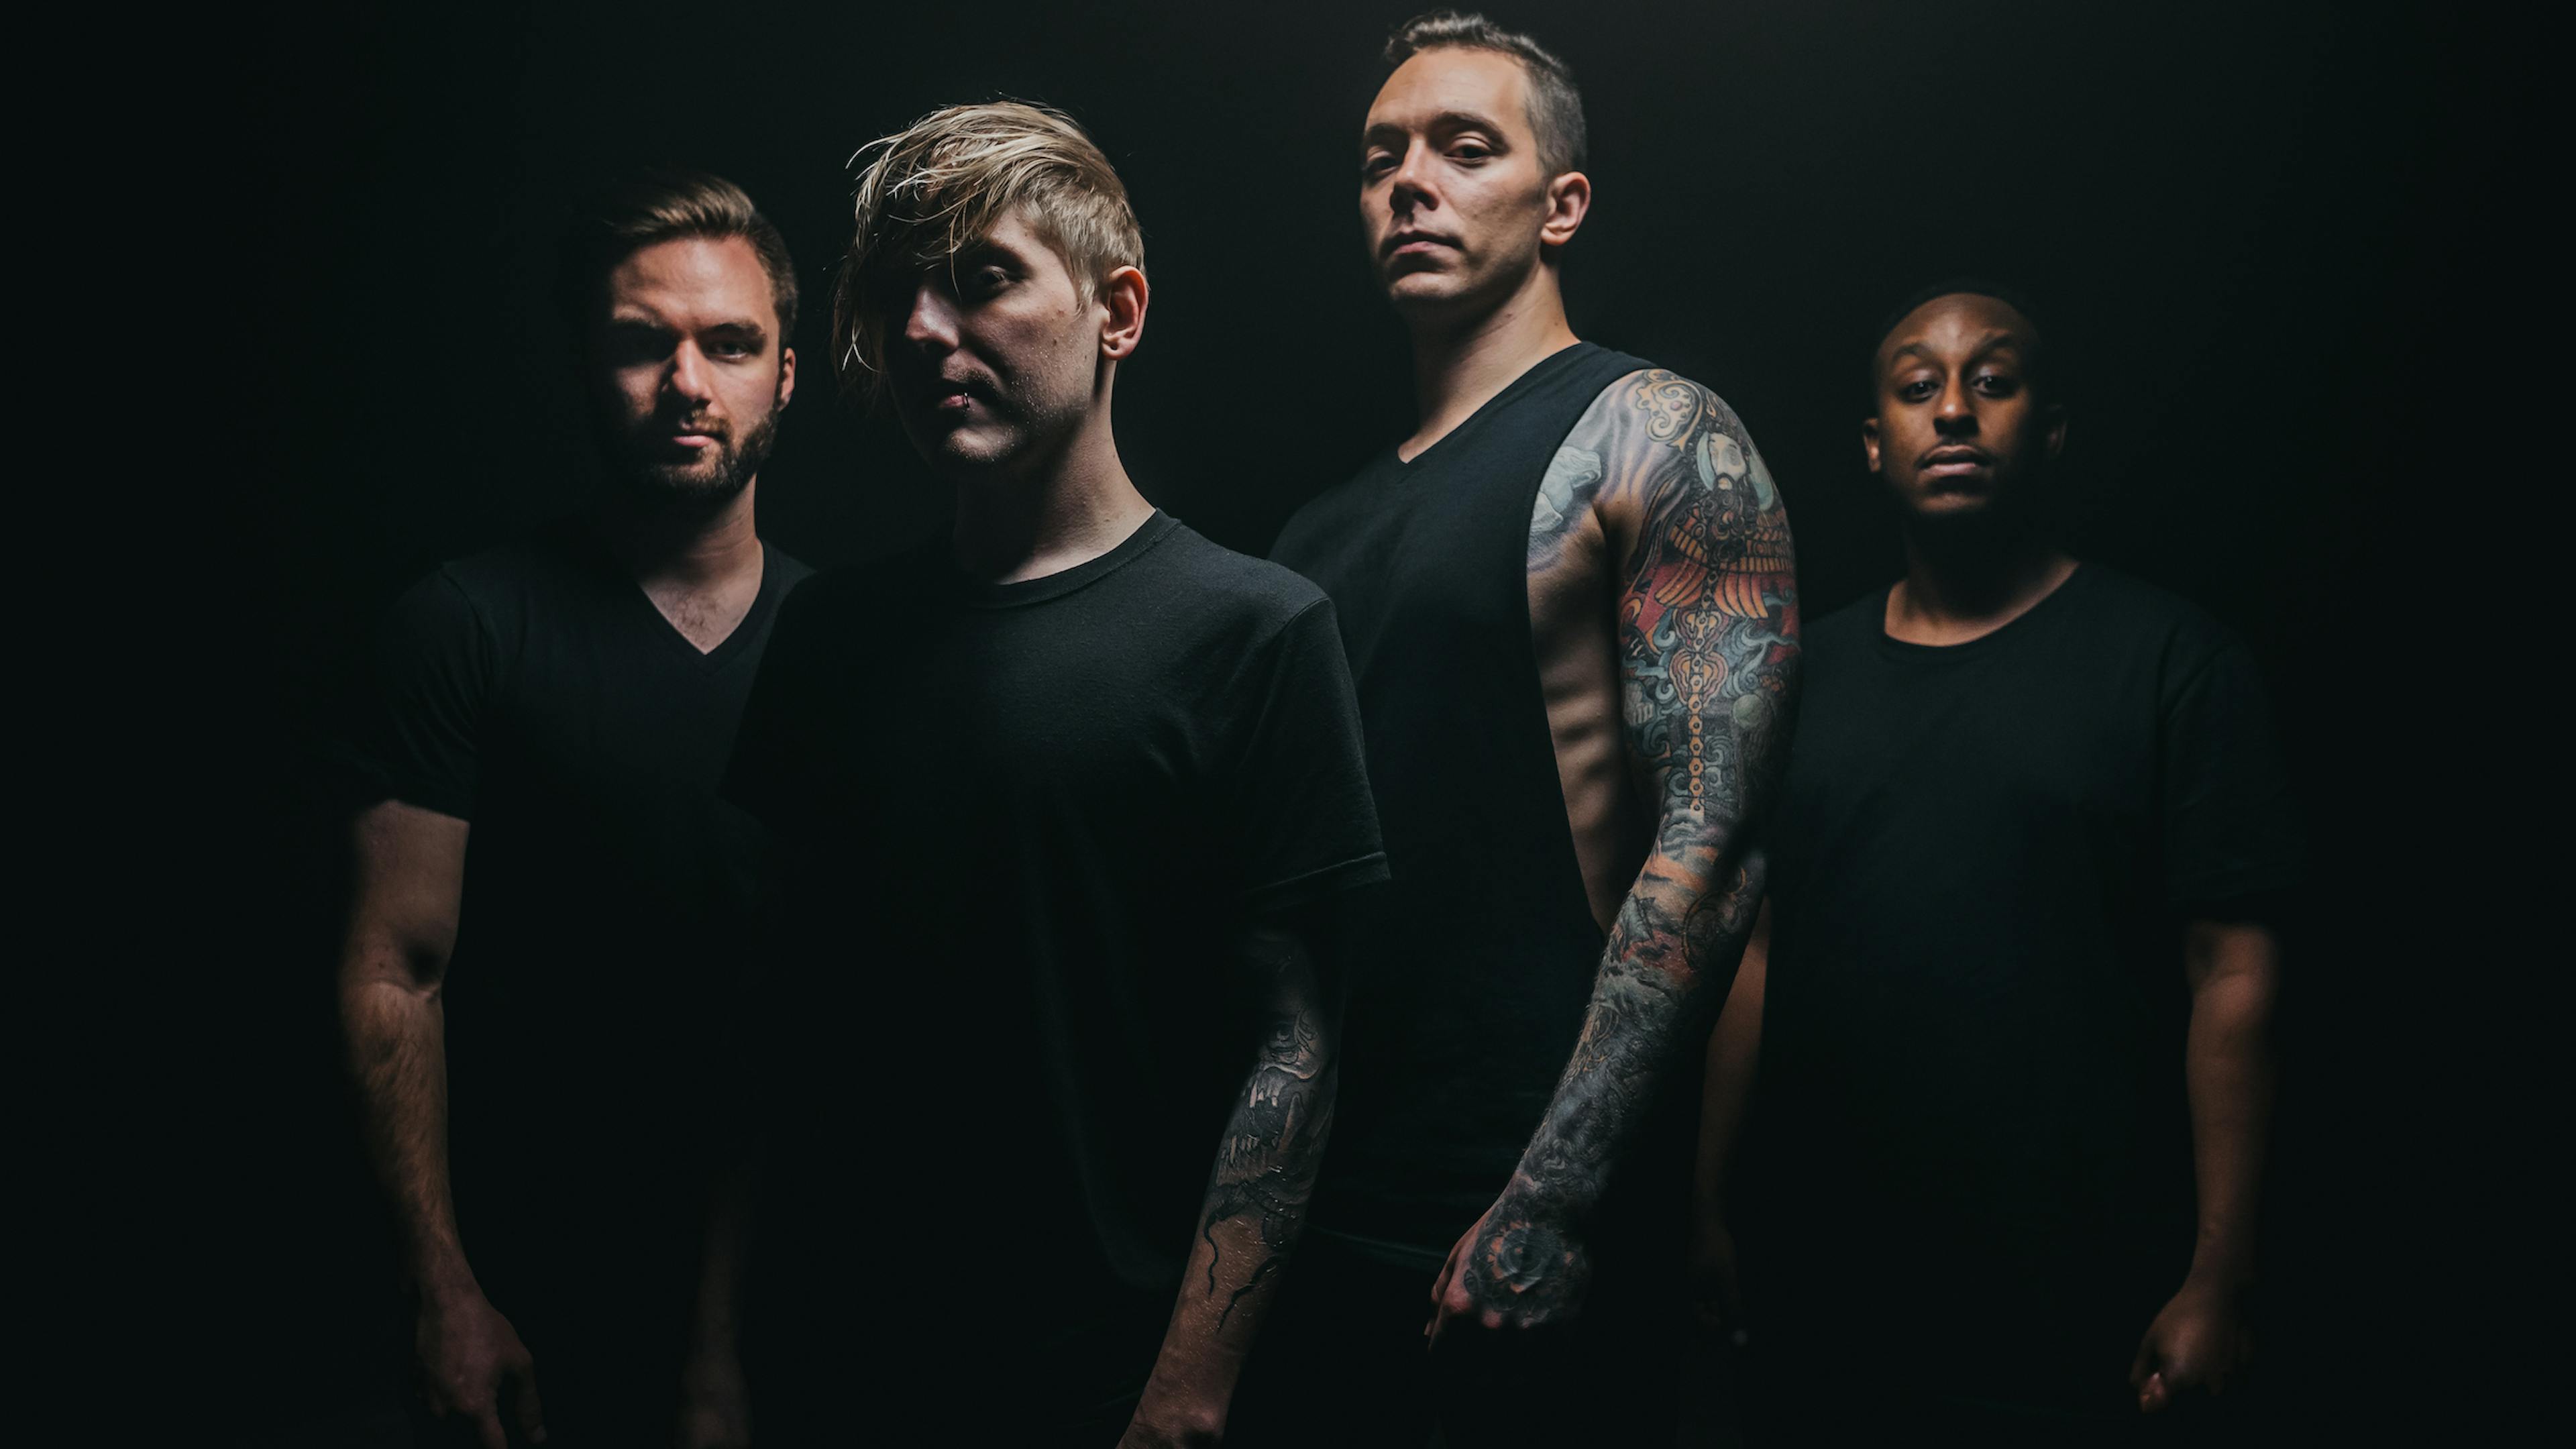 Exclusive: Enterprise Earth Embrace Darkness In New Video